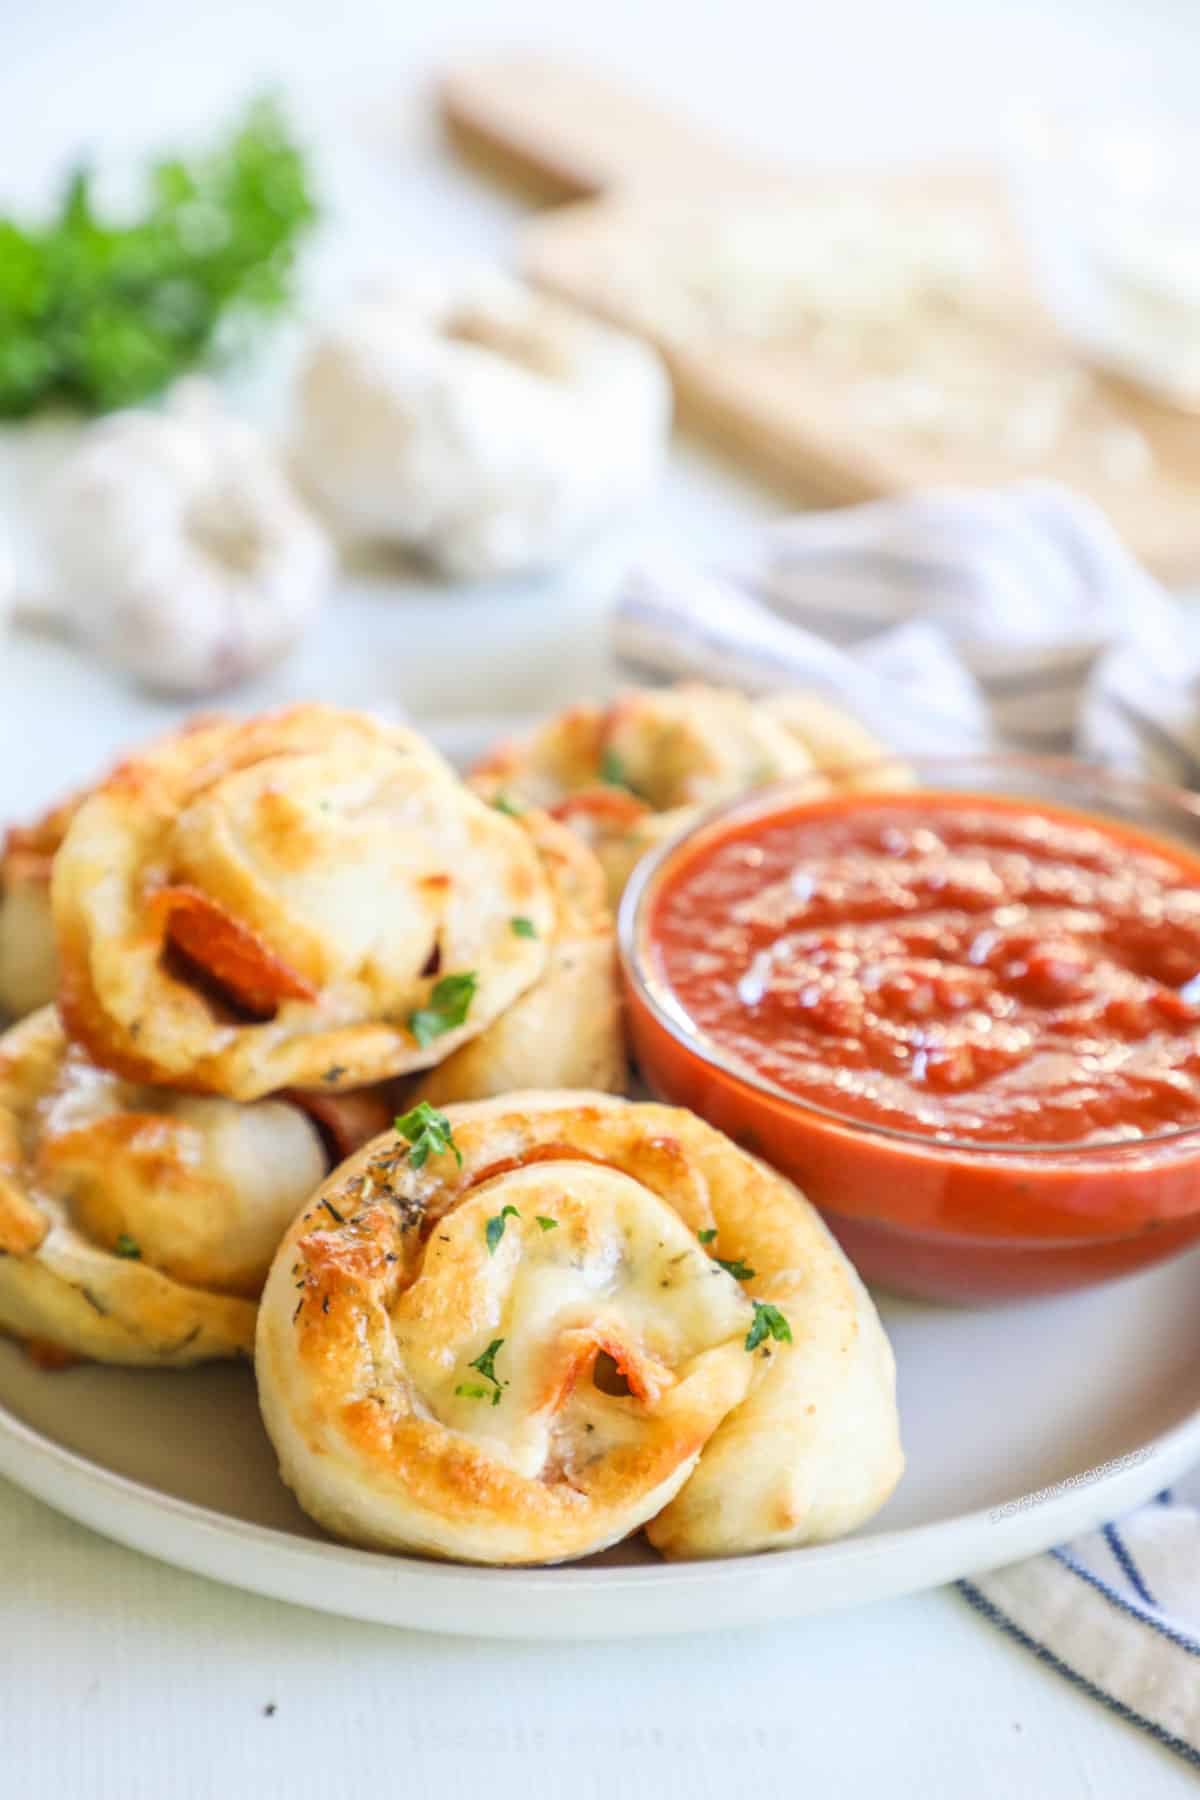 pepperoni pizza rolls on a plate with a small bowl of marinara sauce.